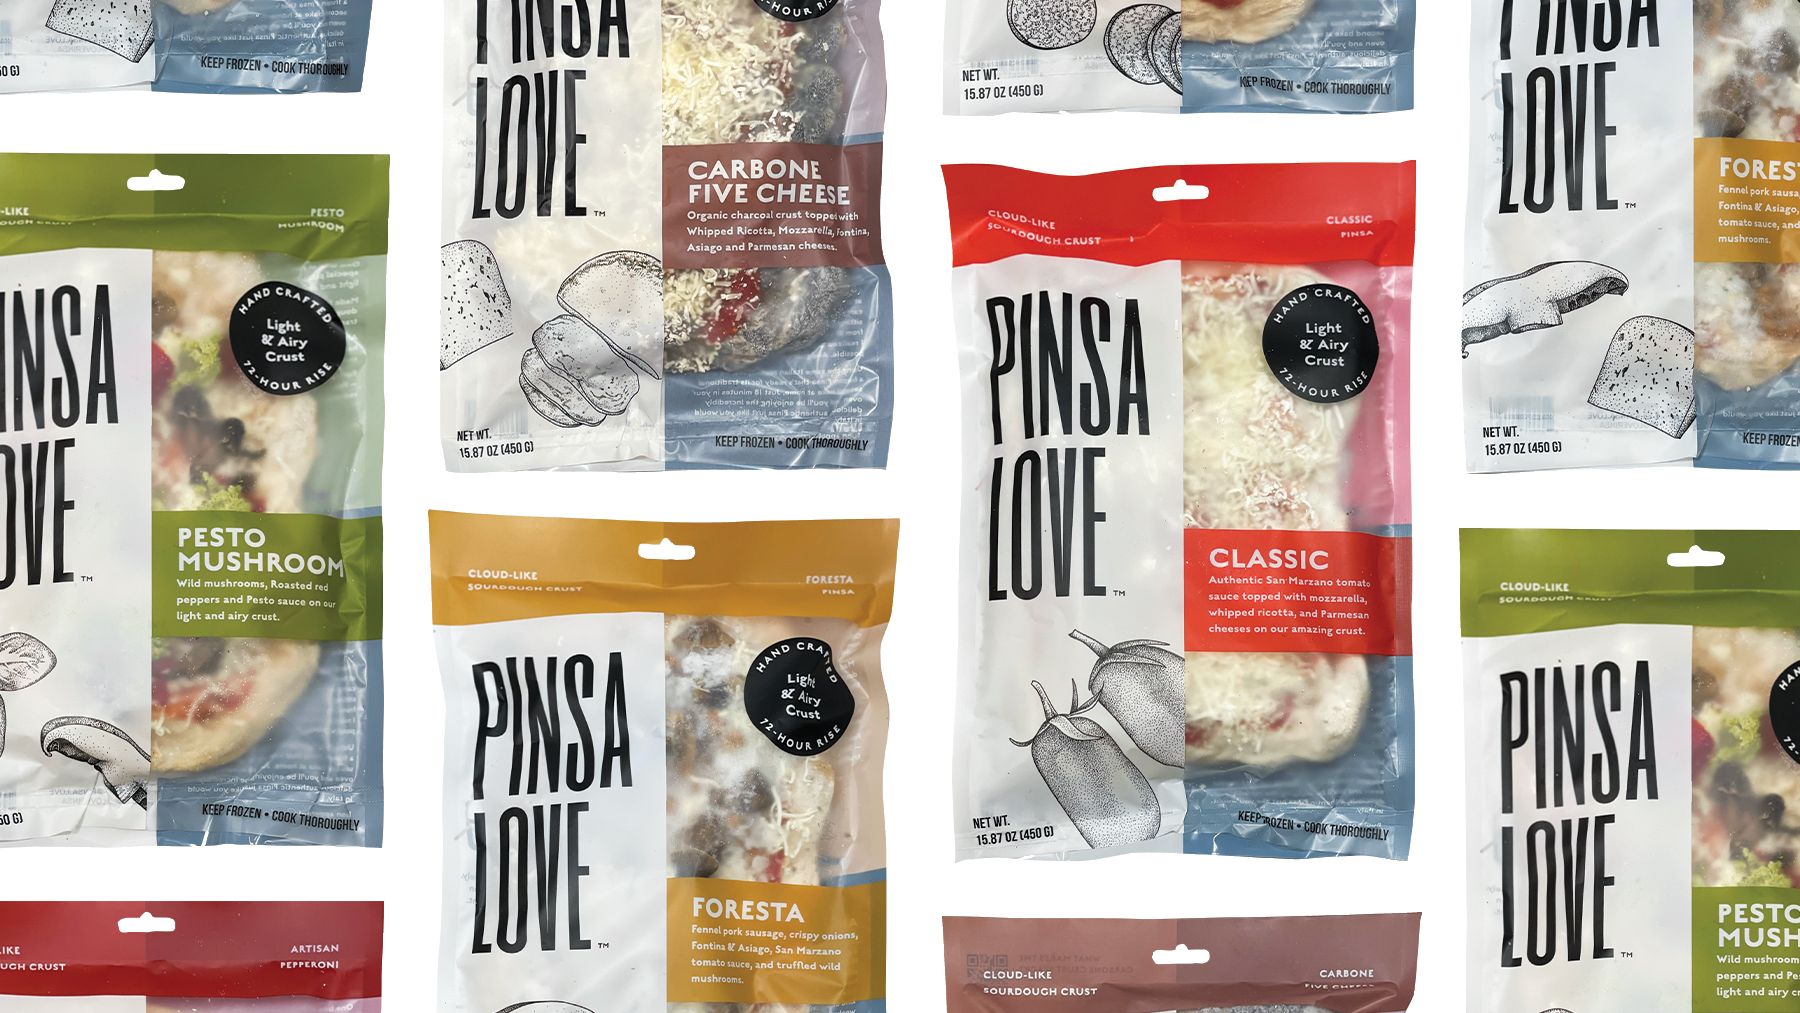 Rising to the Top: Pinsa.Love Launches with MOMs organic